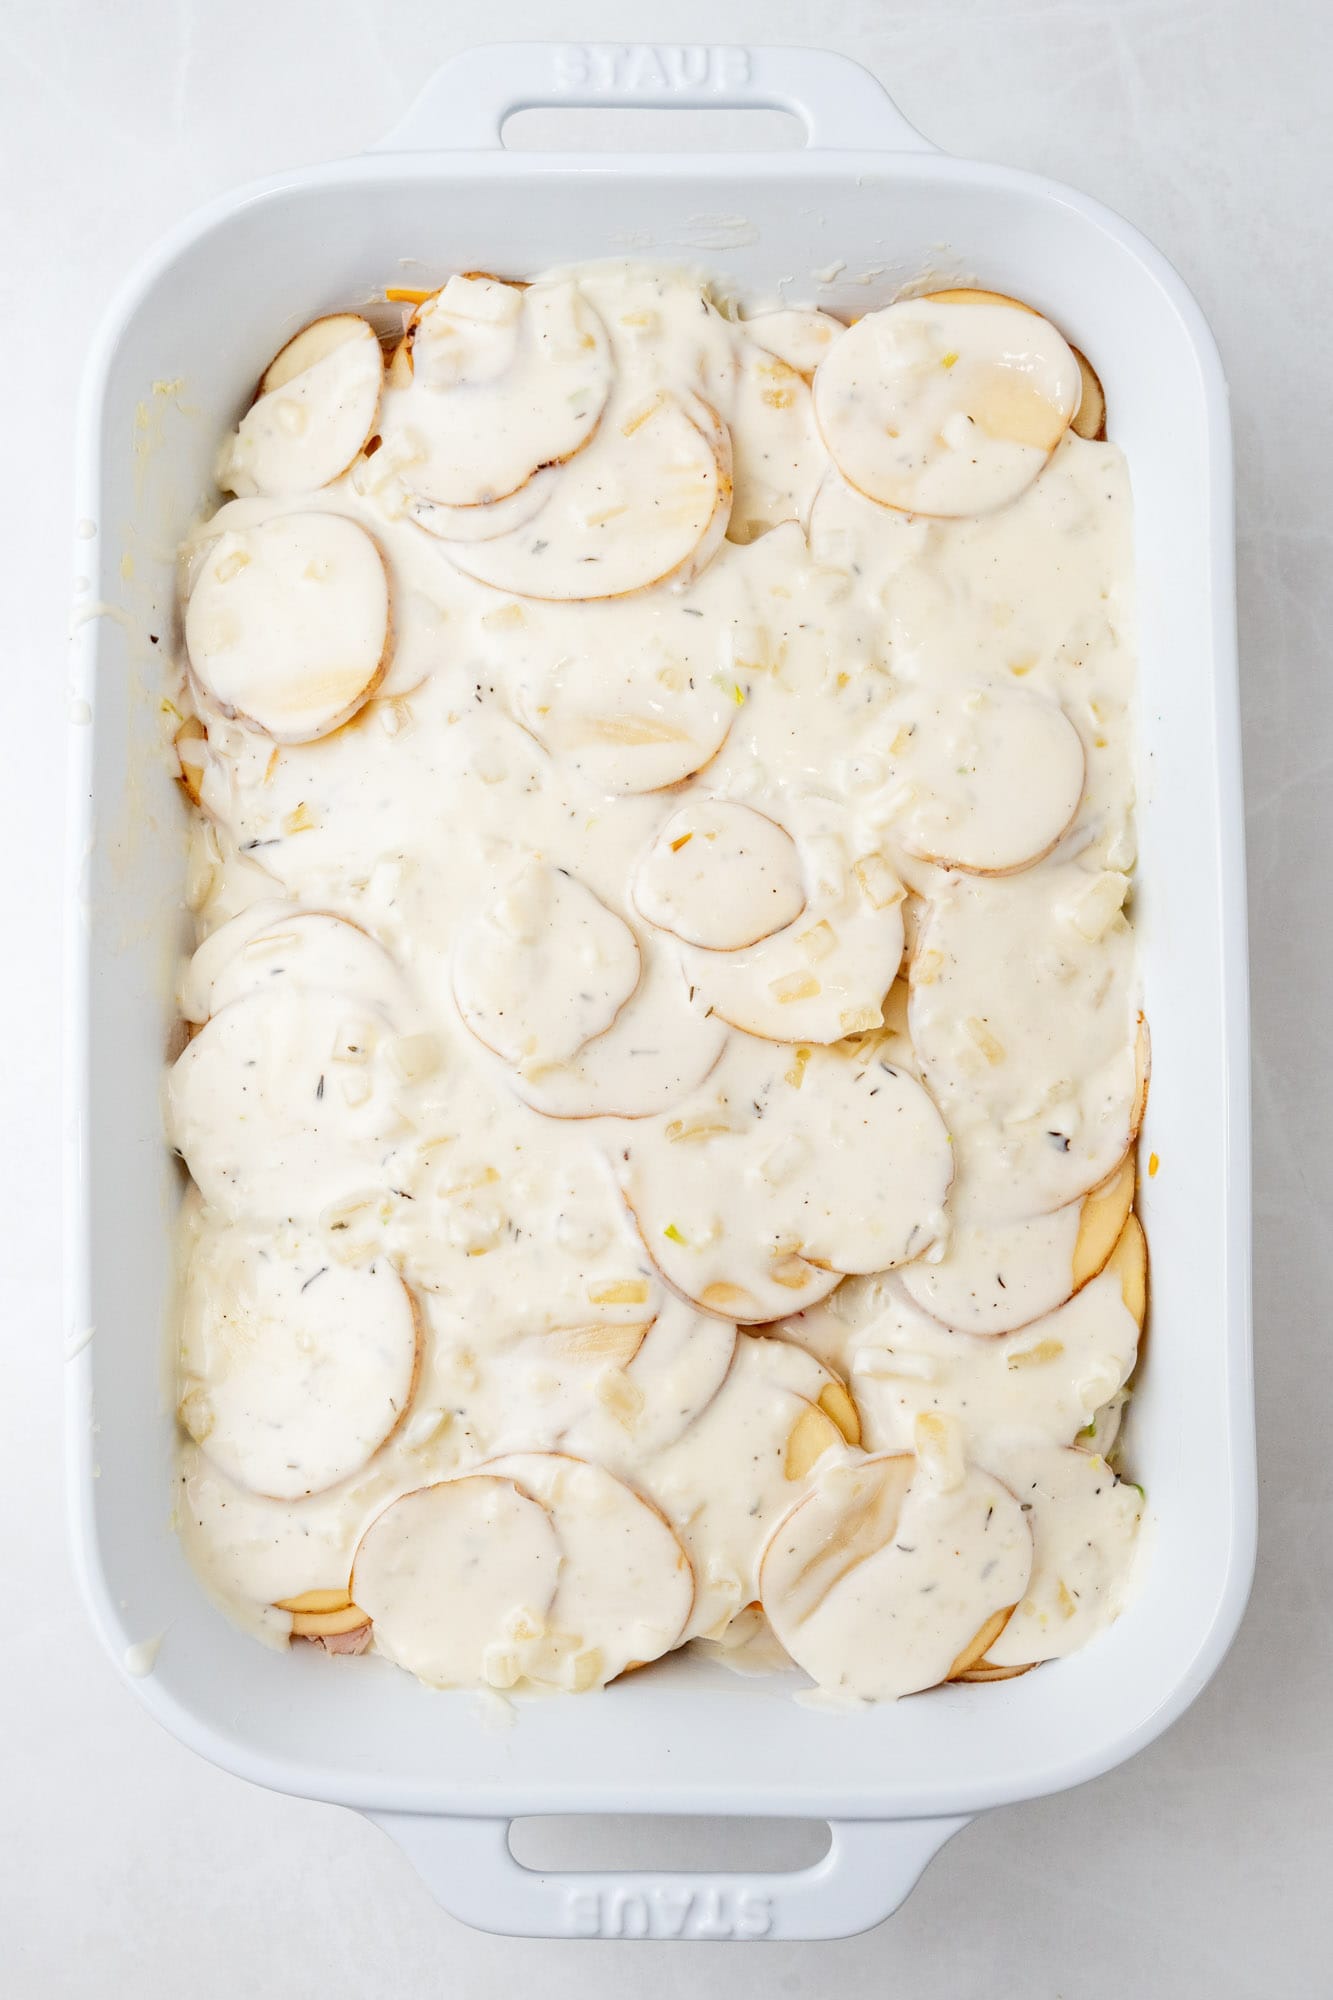 thinly sliced potatoes in a creamy sauce layered in a white ceramic baking dish